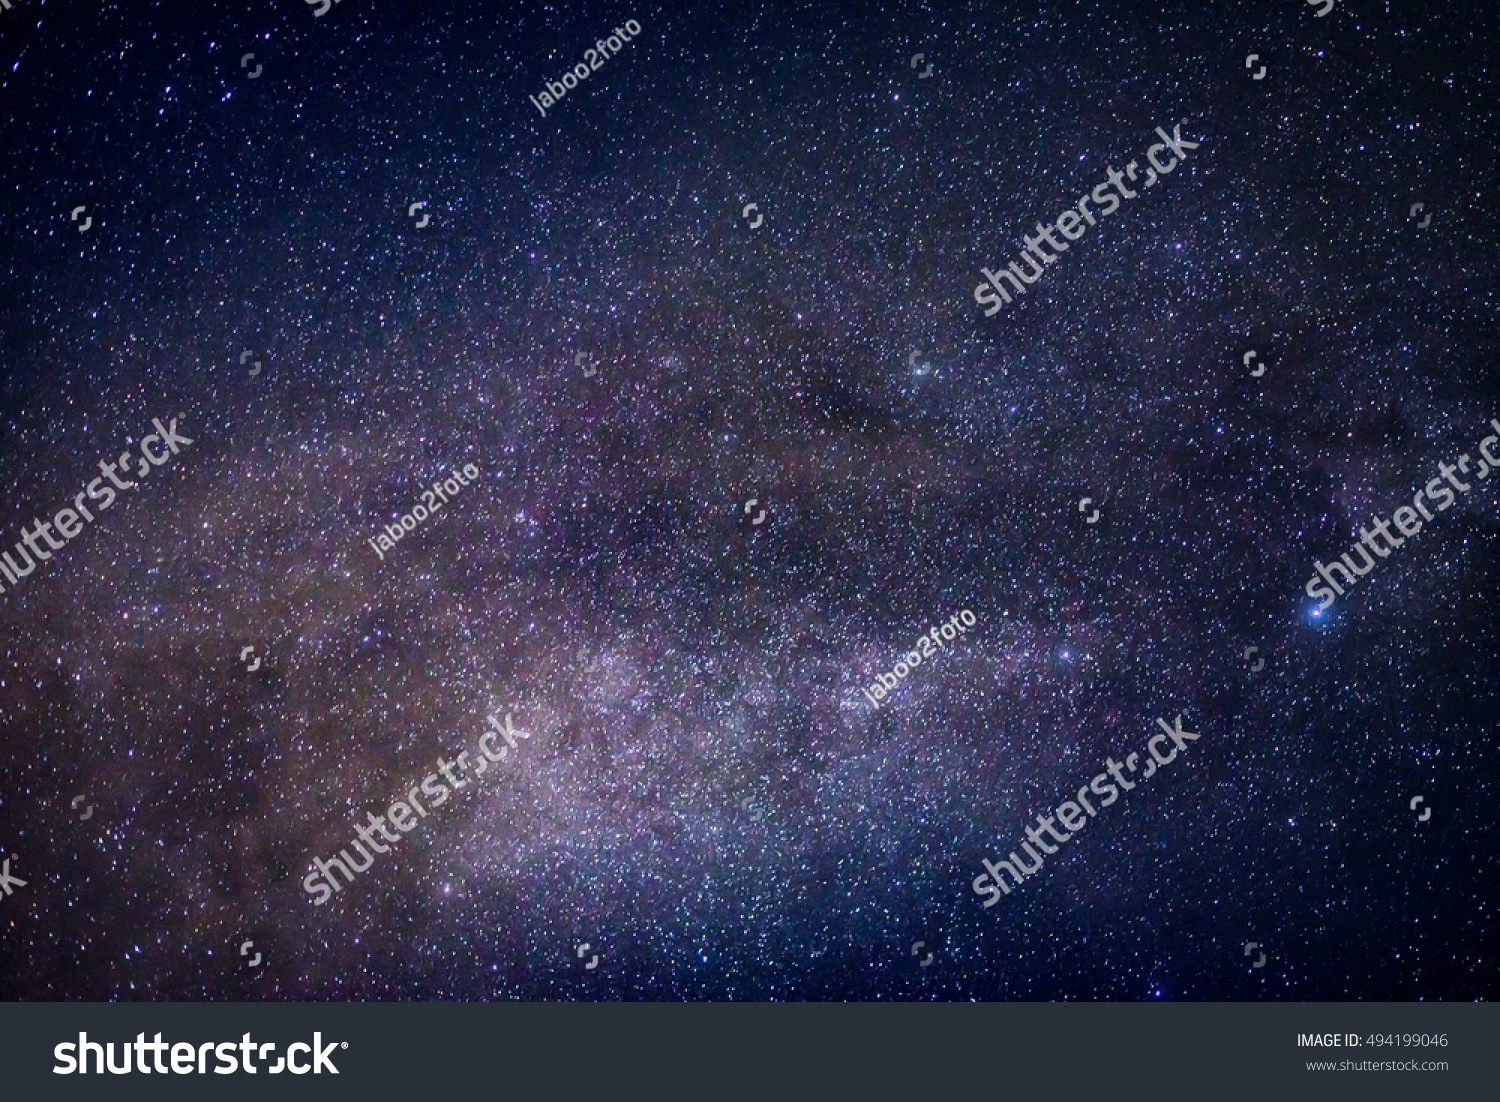 close up detail from the milky way with  stars  field #494199046